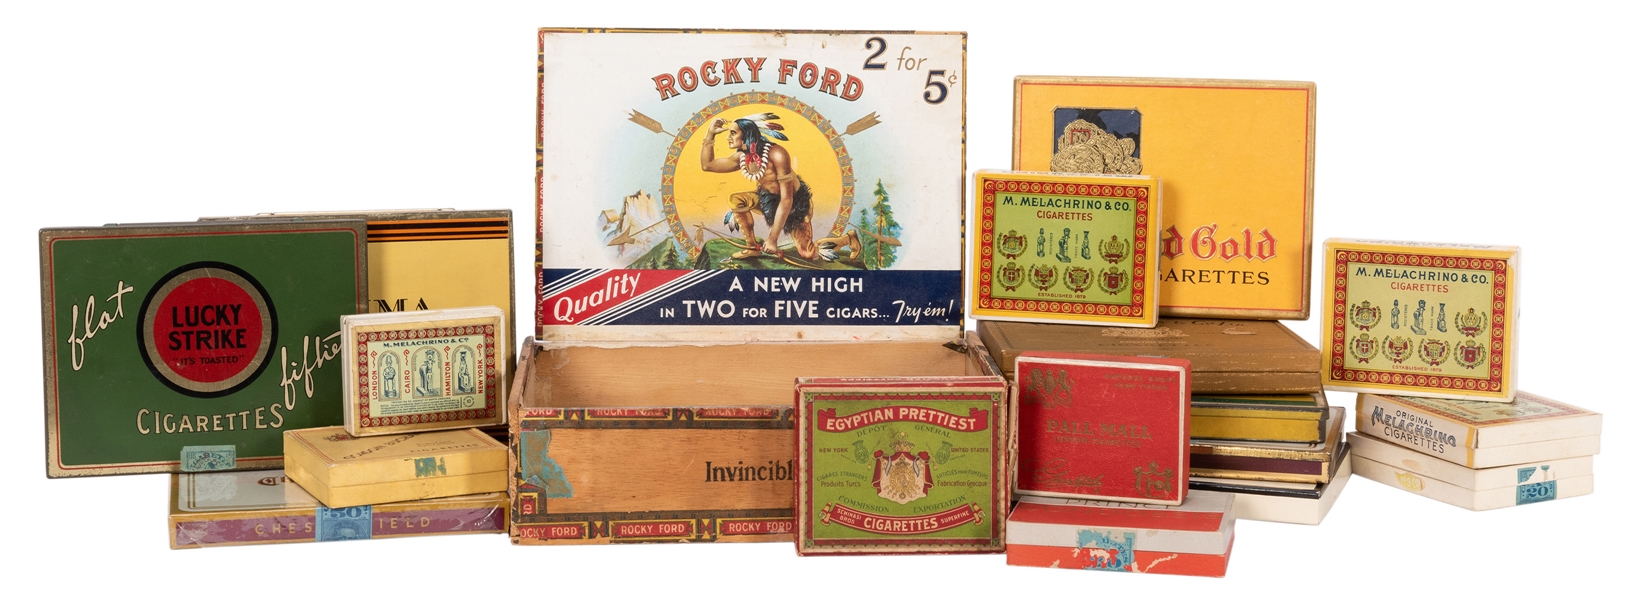  Group of 19 Vintage Cigarette Boxes and Tins. Brands includ...